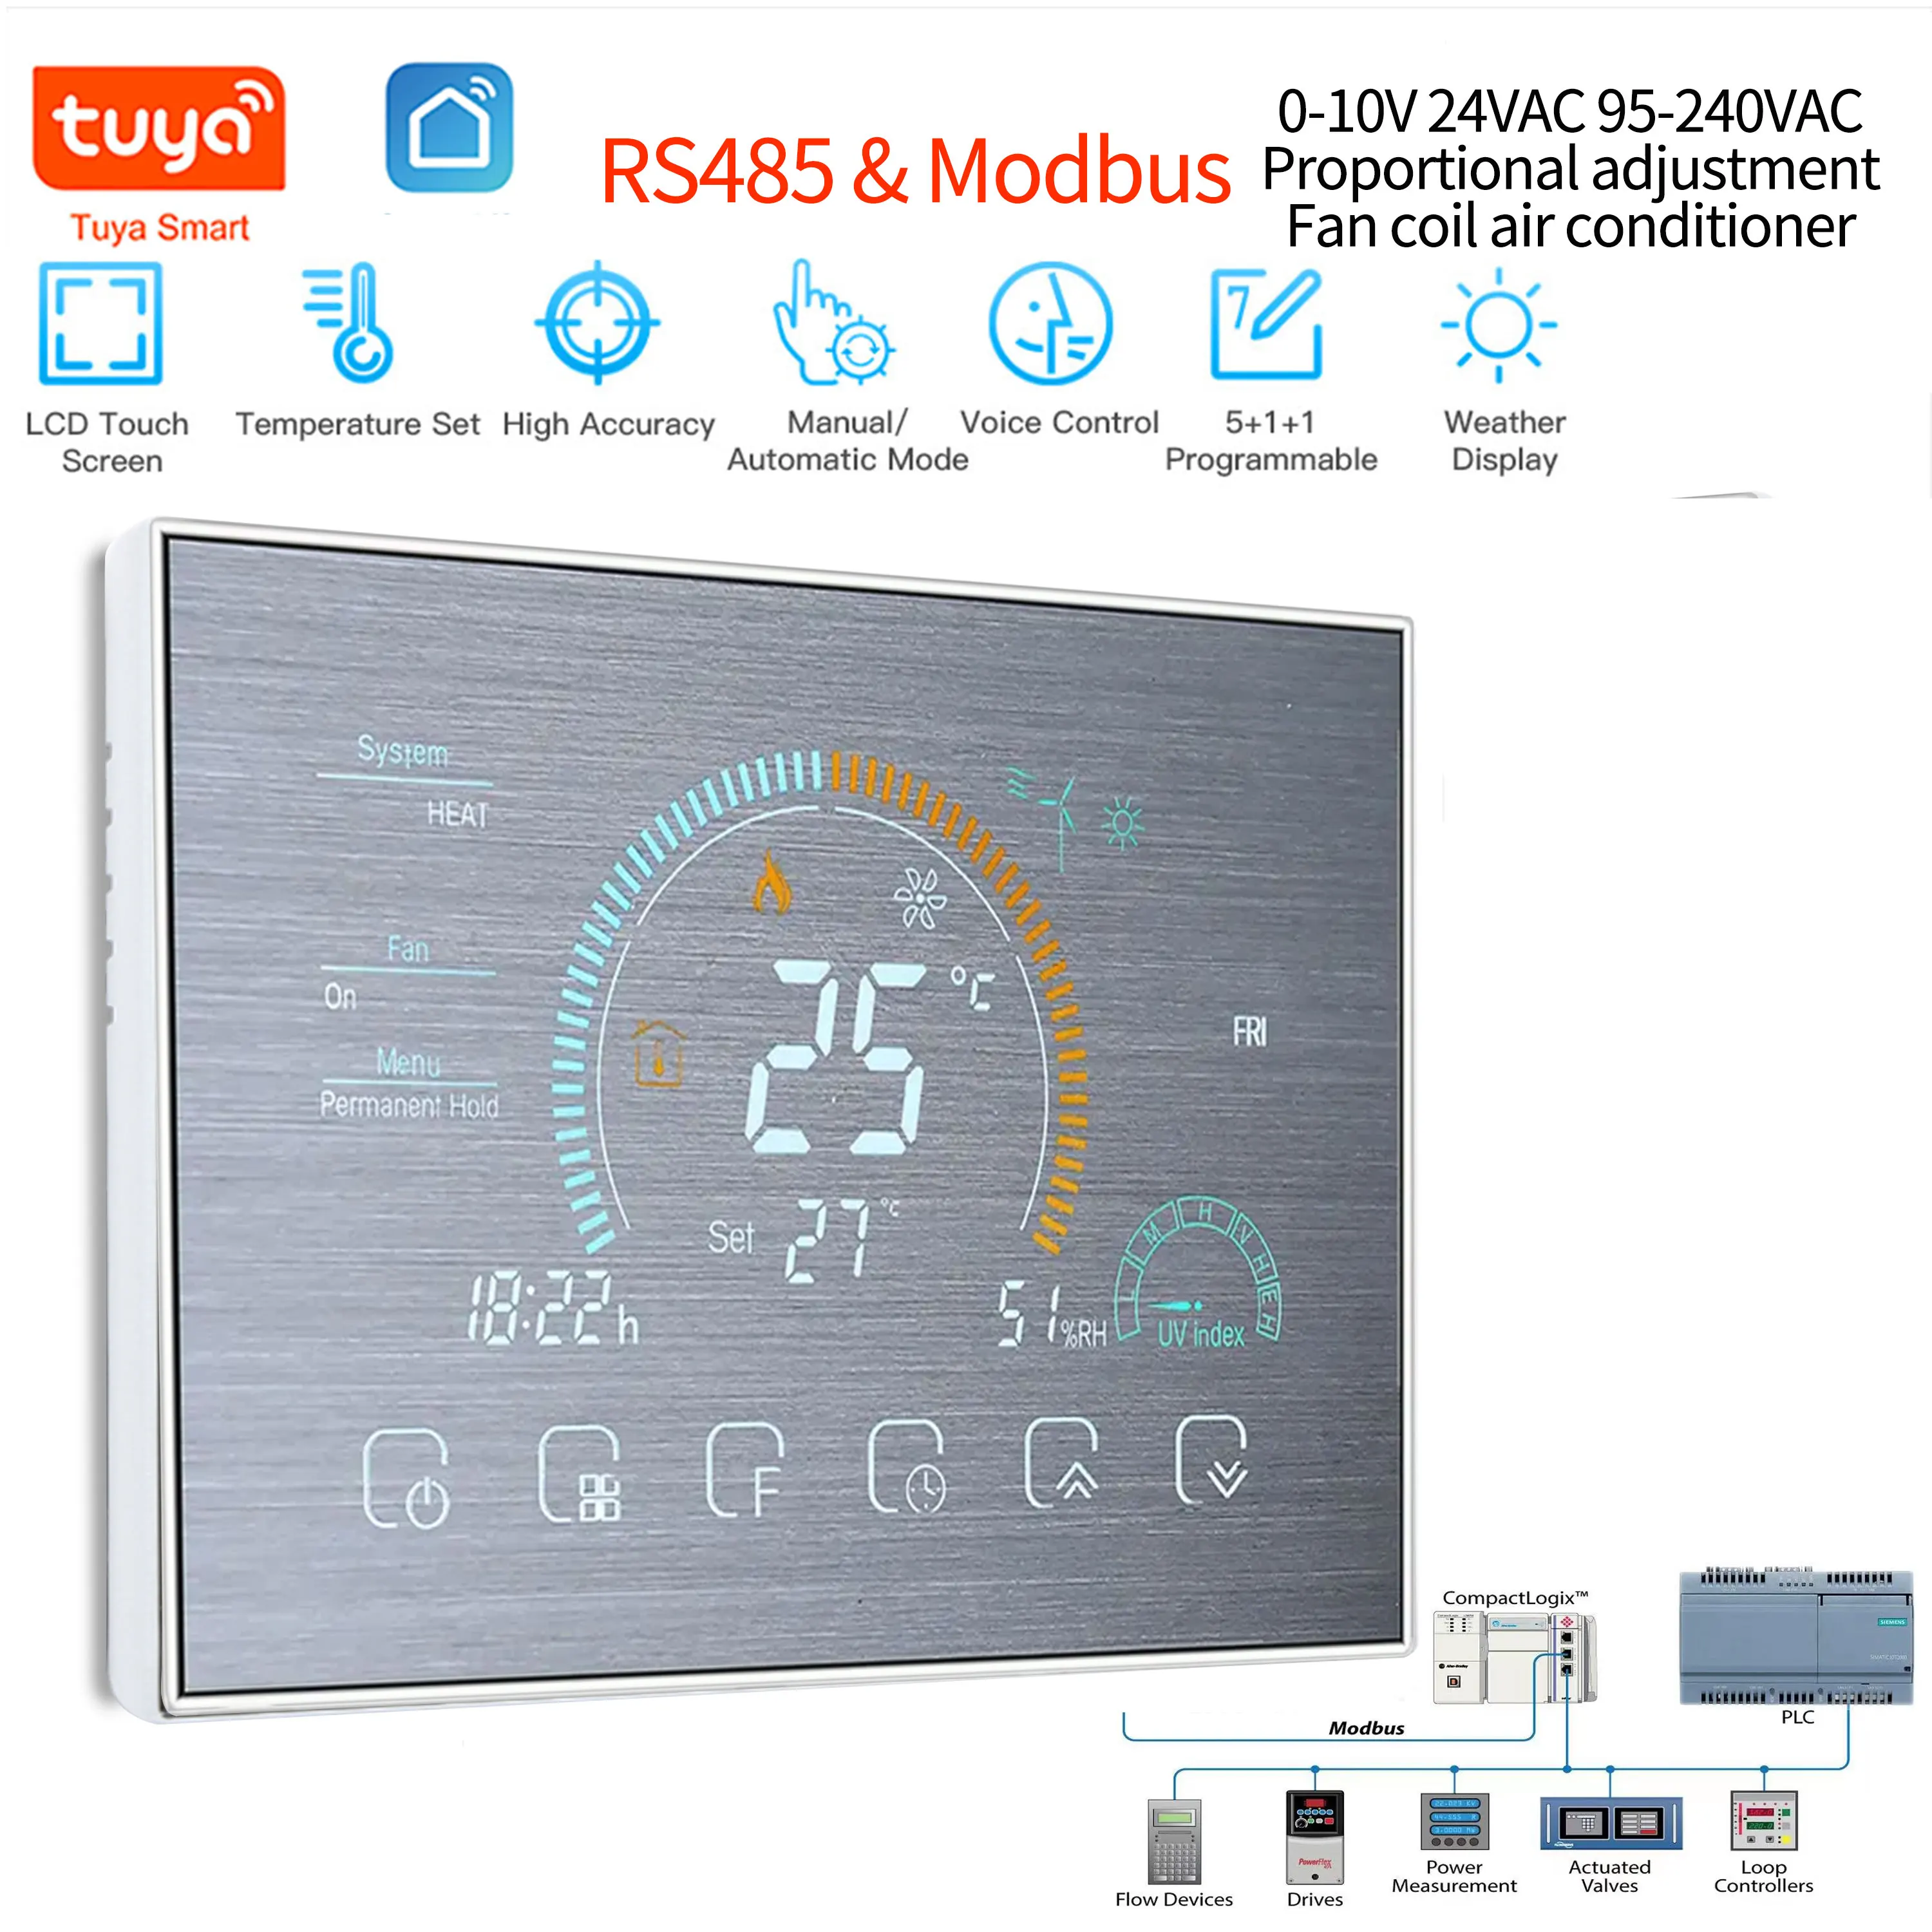 

TUYA WIFI Air Conditioner Thermostat with RS485& Modbus RTU Communication Interface,Temperature Controller 3 Speed Fan Coil Unit